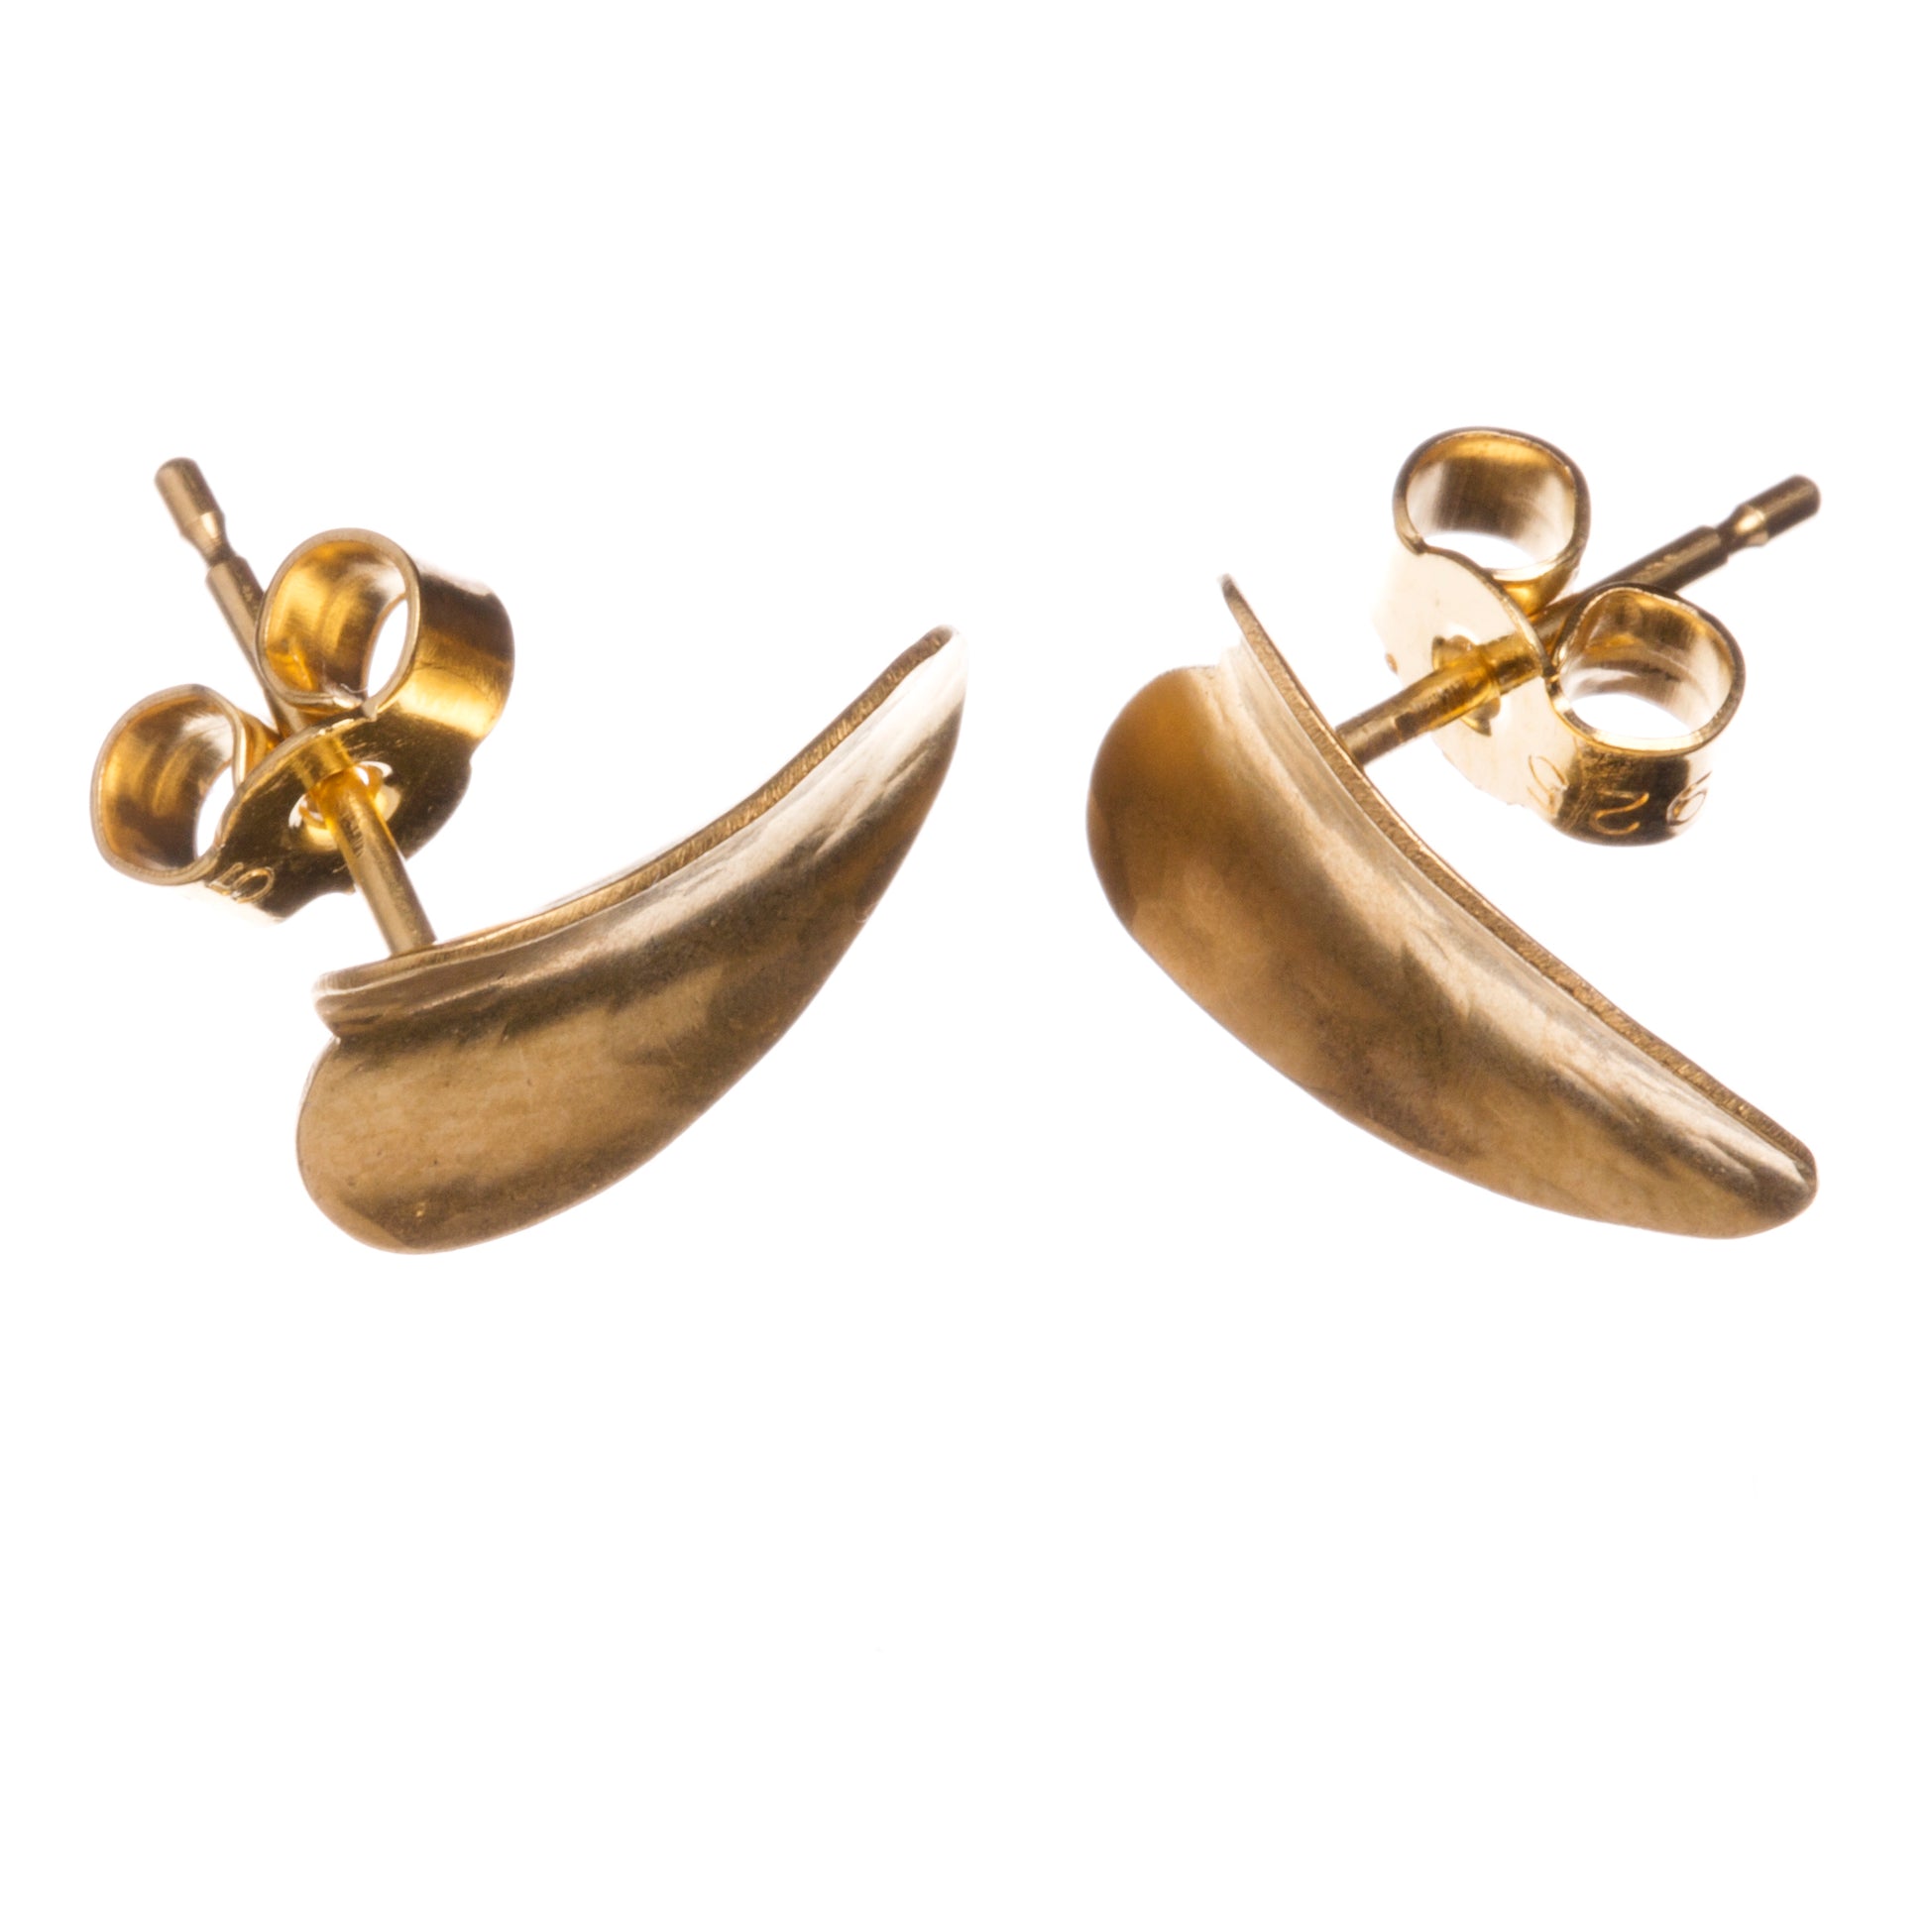 A pair of simple silver heart stud earrings, gold plated, showing the satin-matte finish and the three-dimensional curves.